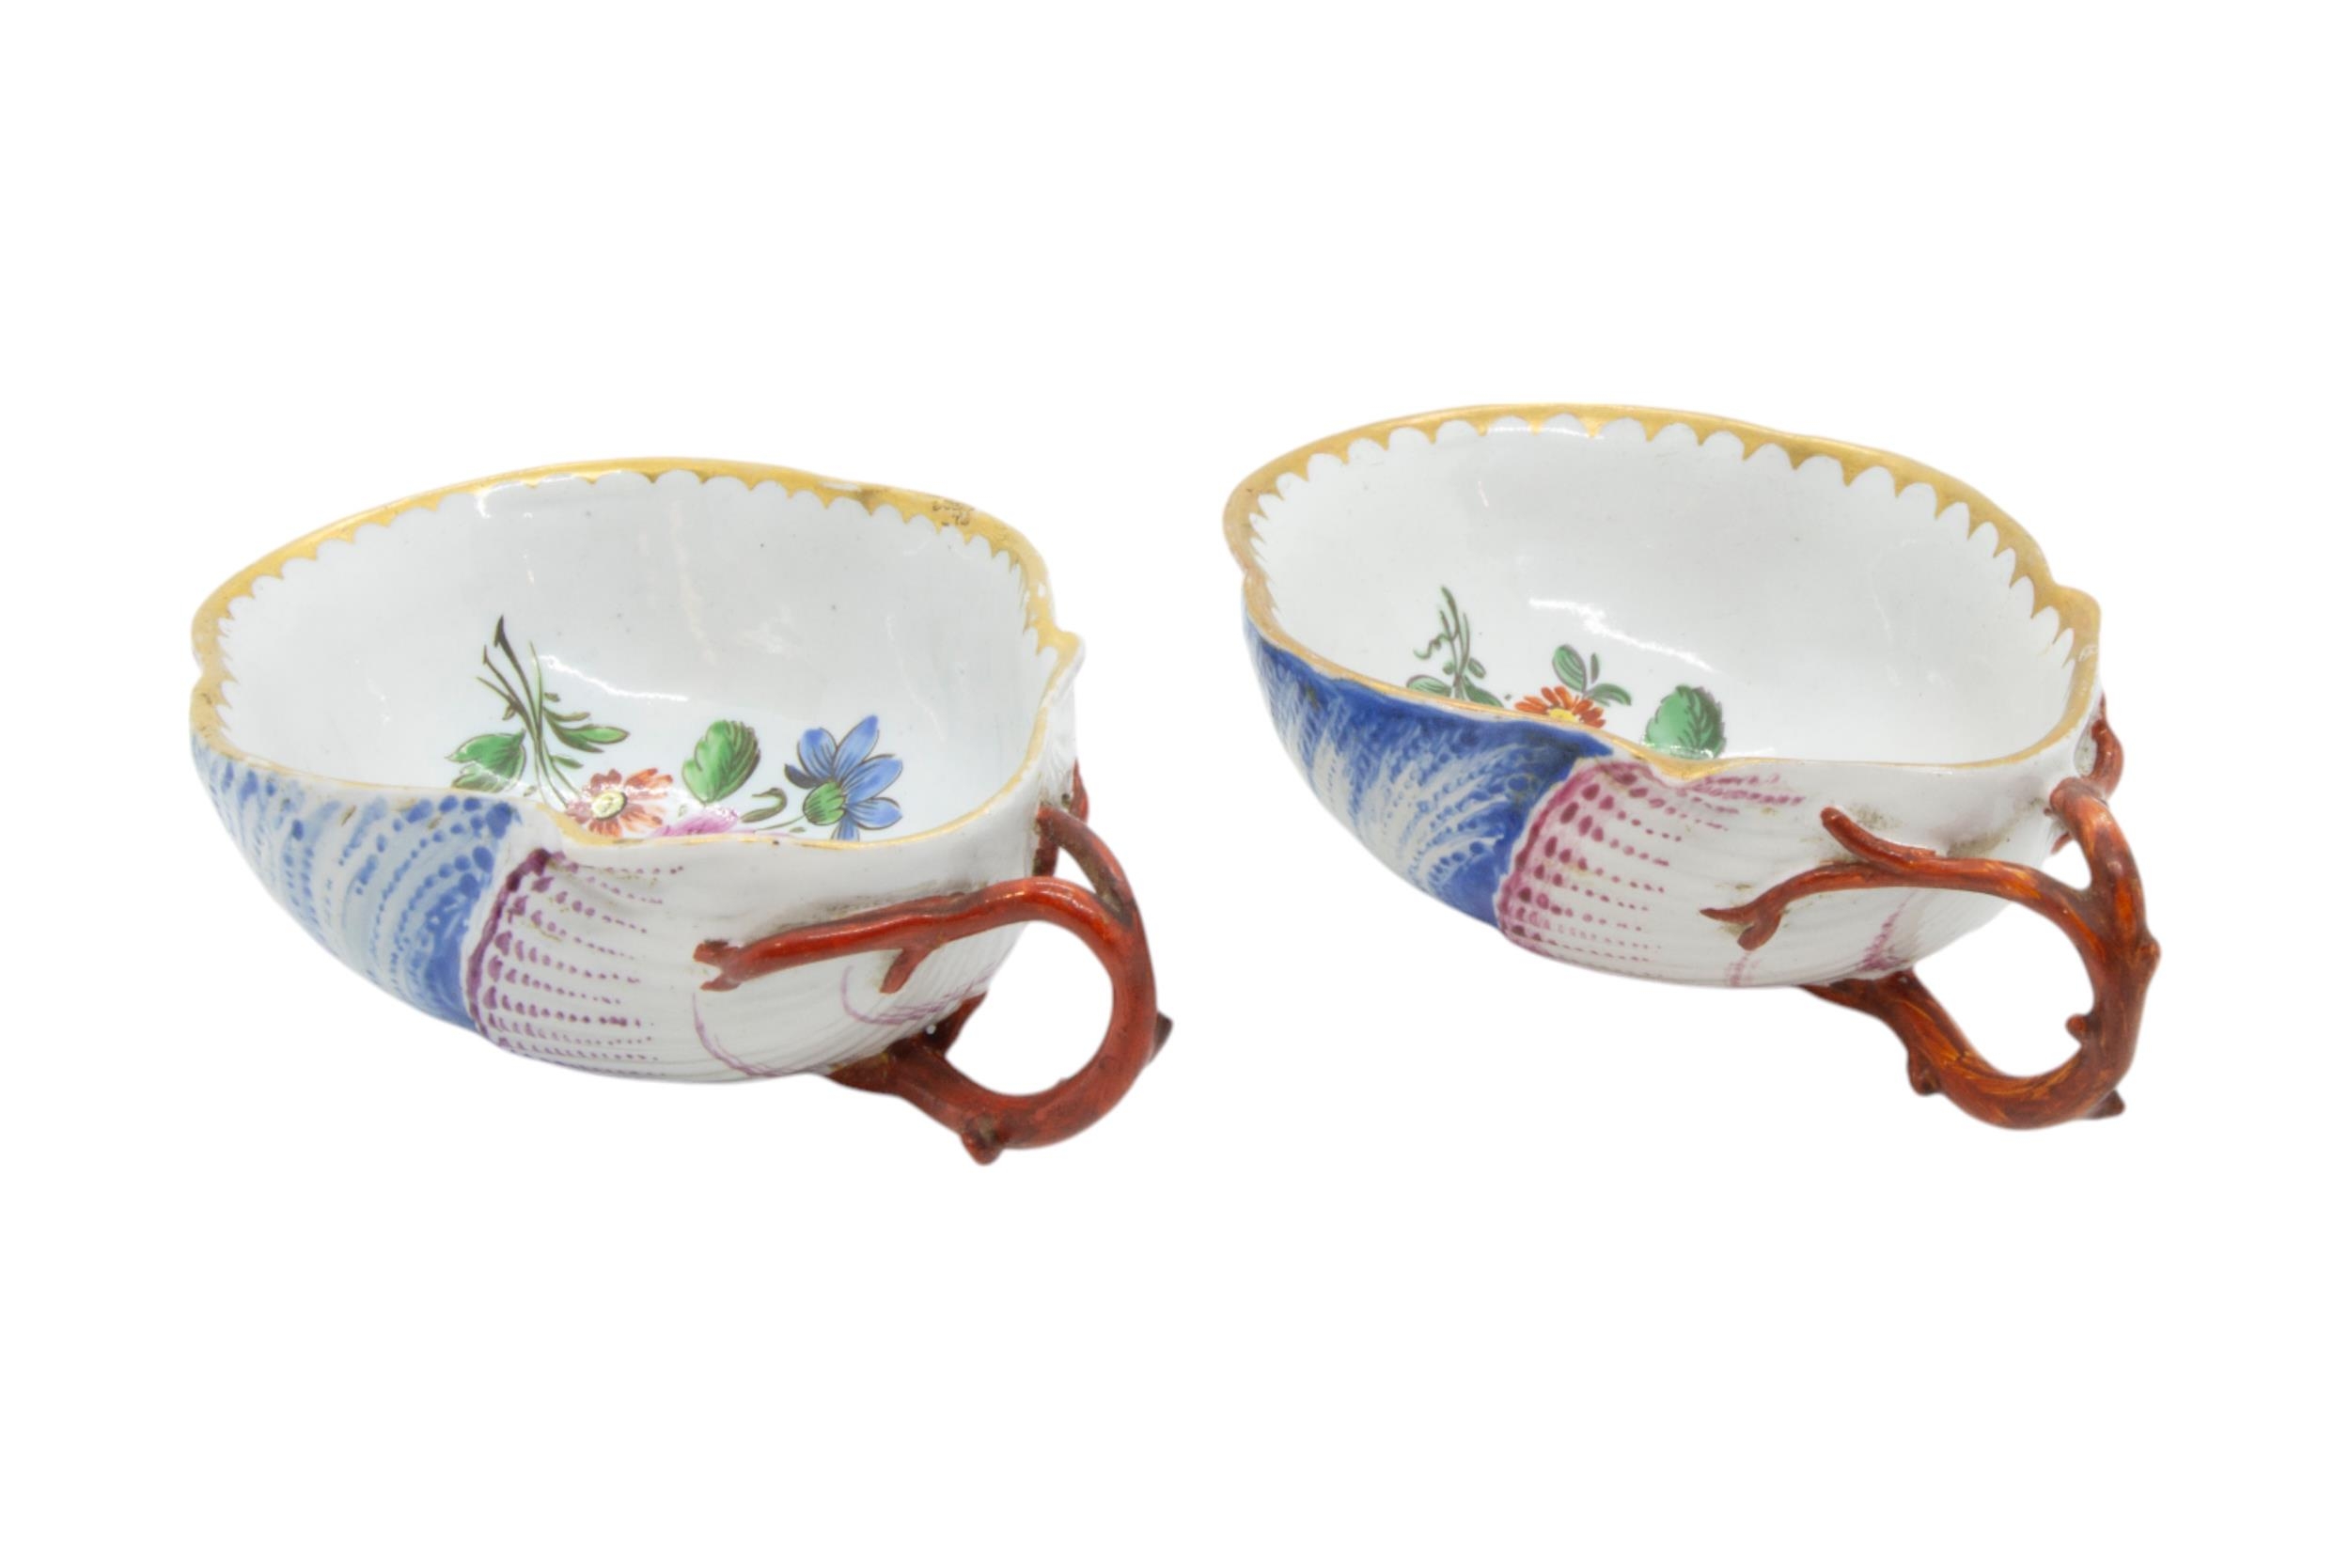 A PAIR OF ITALIAN PORCELAIN SORBET CUPS, LATE 18TH CENTURY, probably Ginori, unusual conch form with - Image 2 of 5